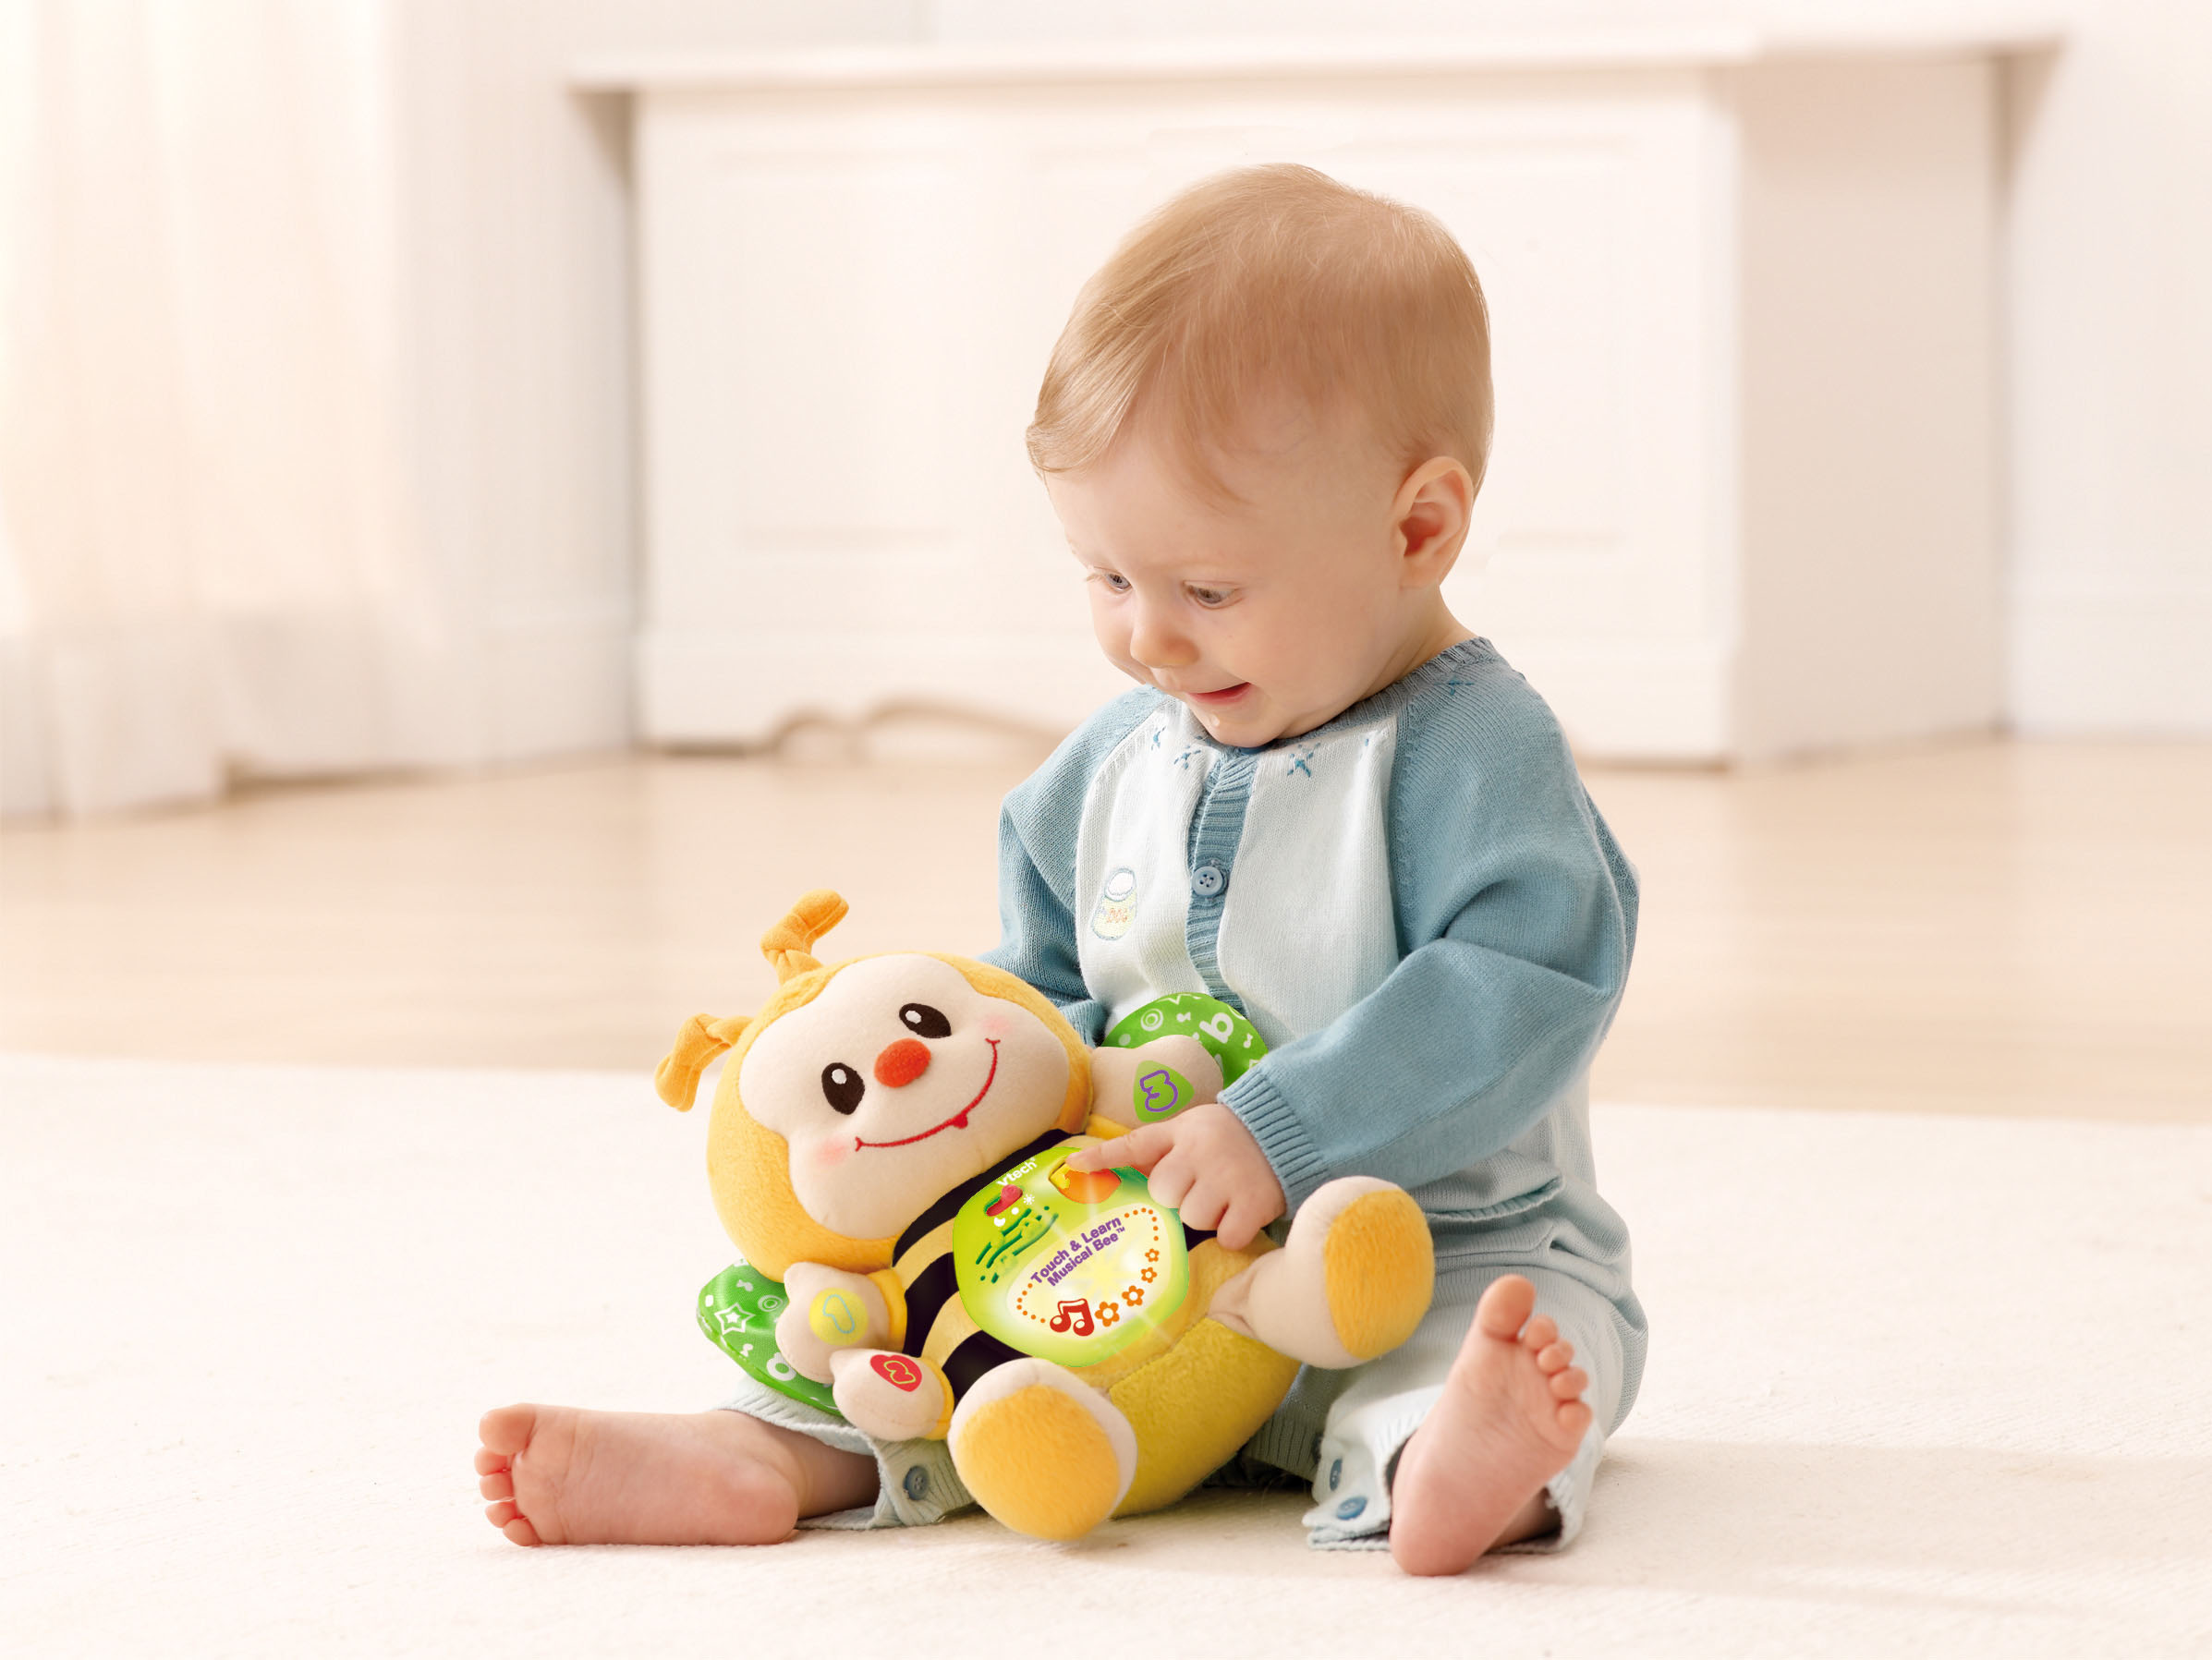 VTech Touch and Learn Musical Bee, Crib Baby Toy, Yellow Plush, Walmart Exclusive - image 3 of 5